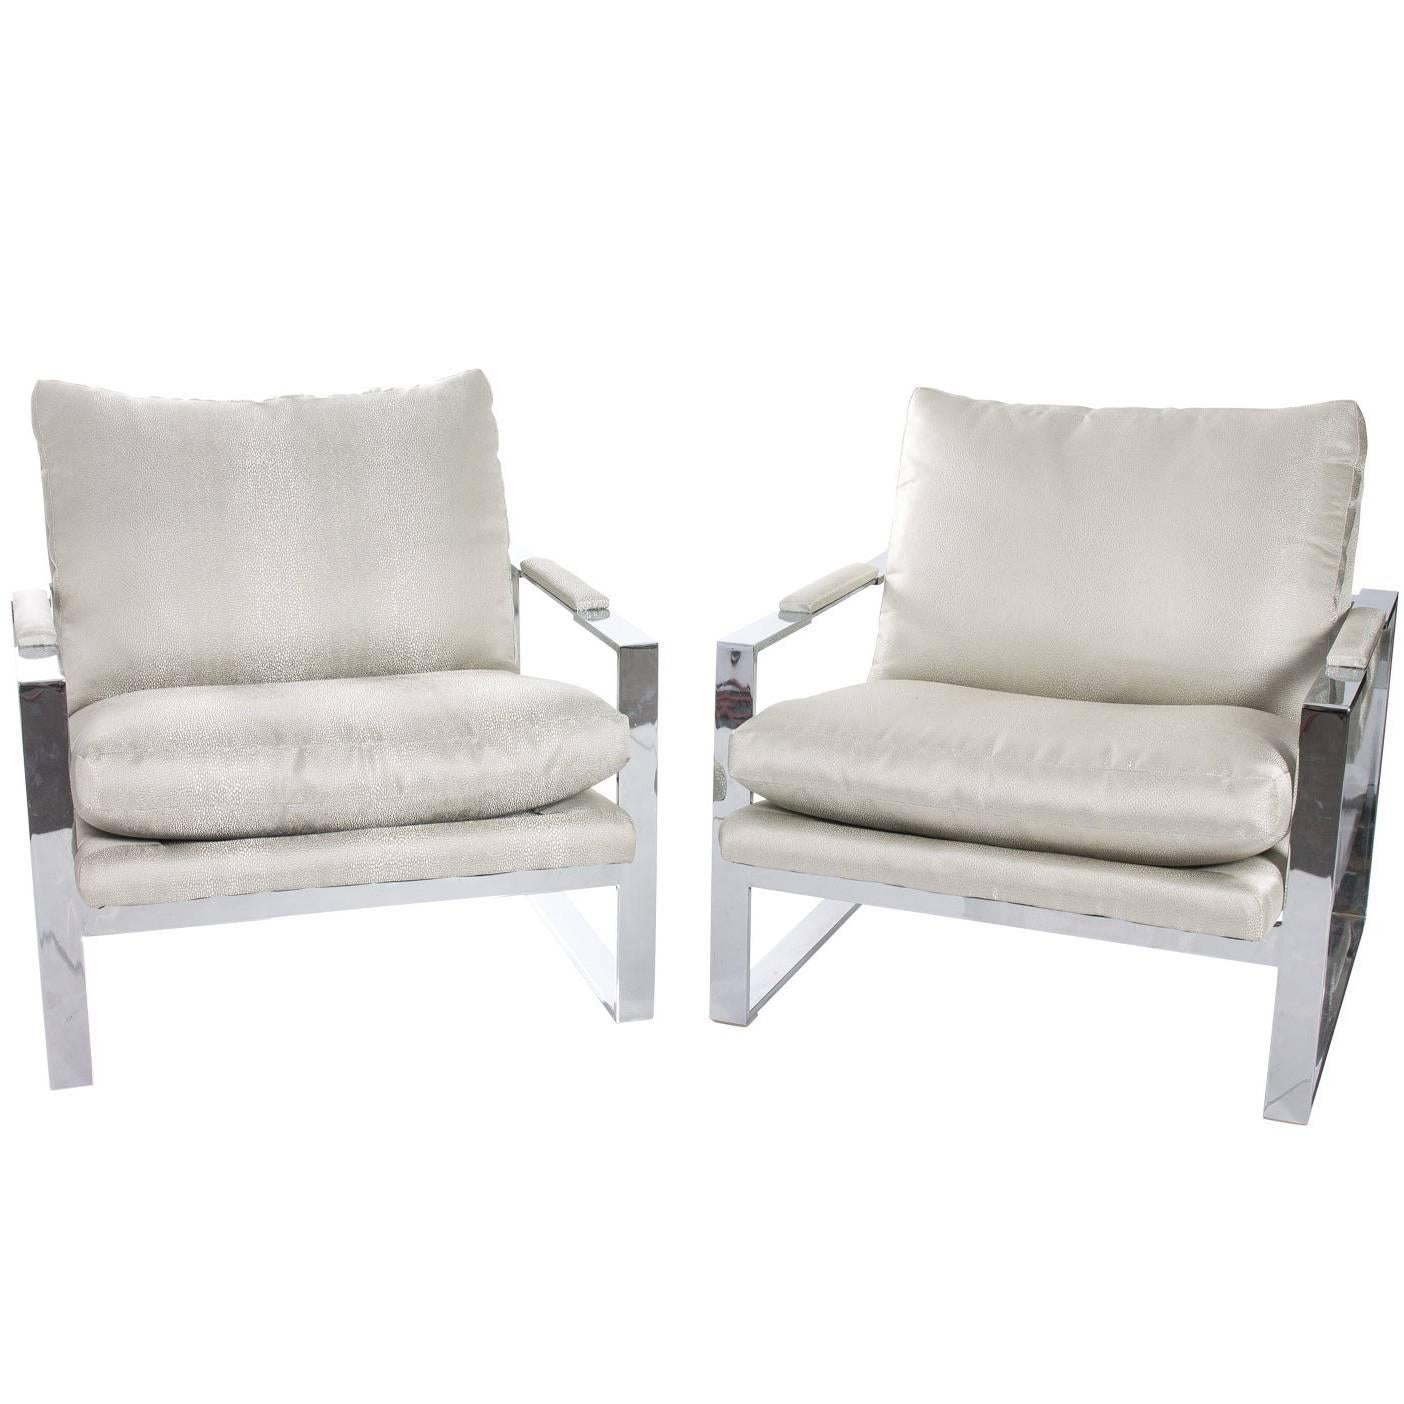 Milo Baughman Upholstered Chairs